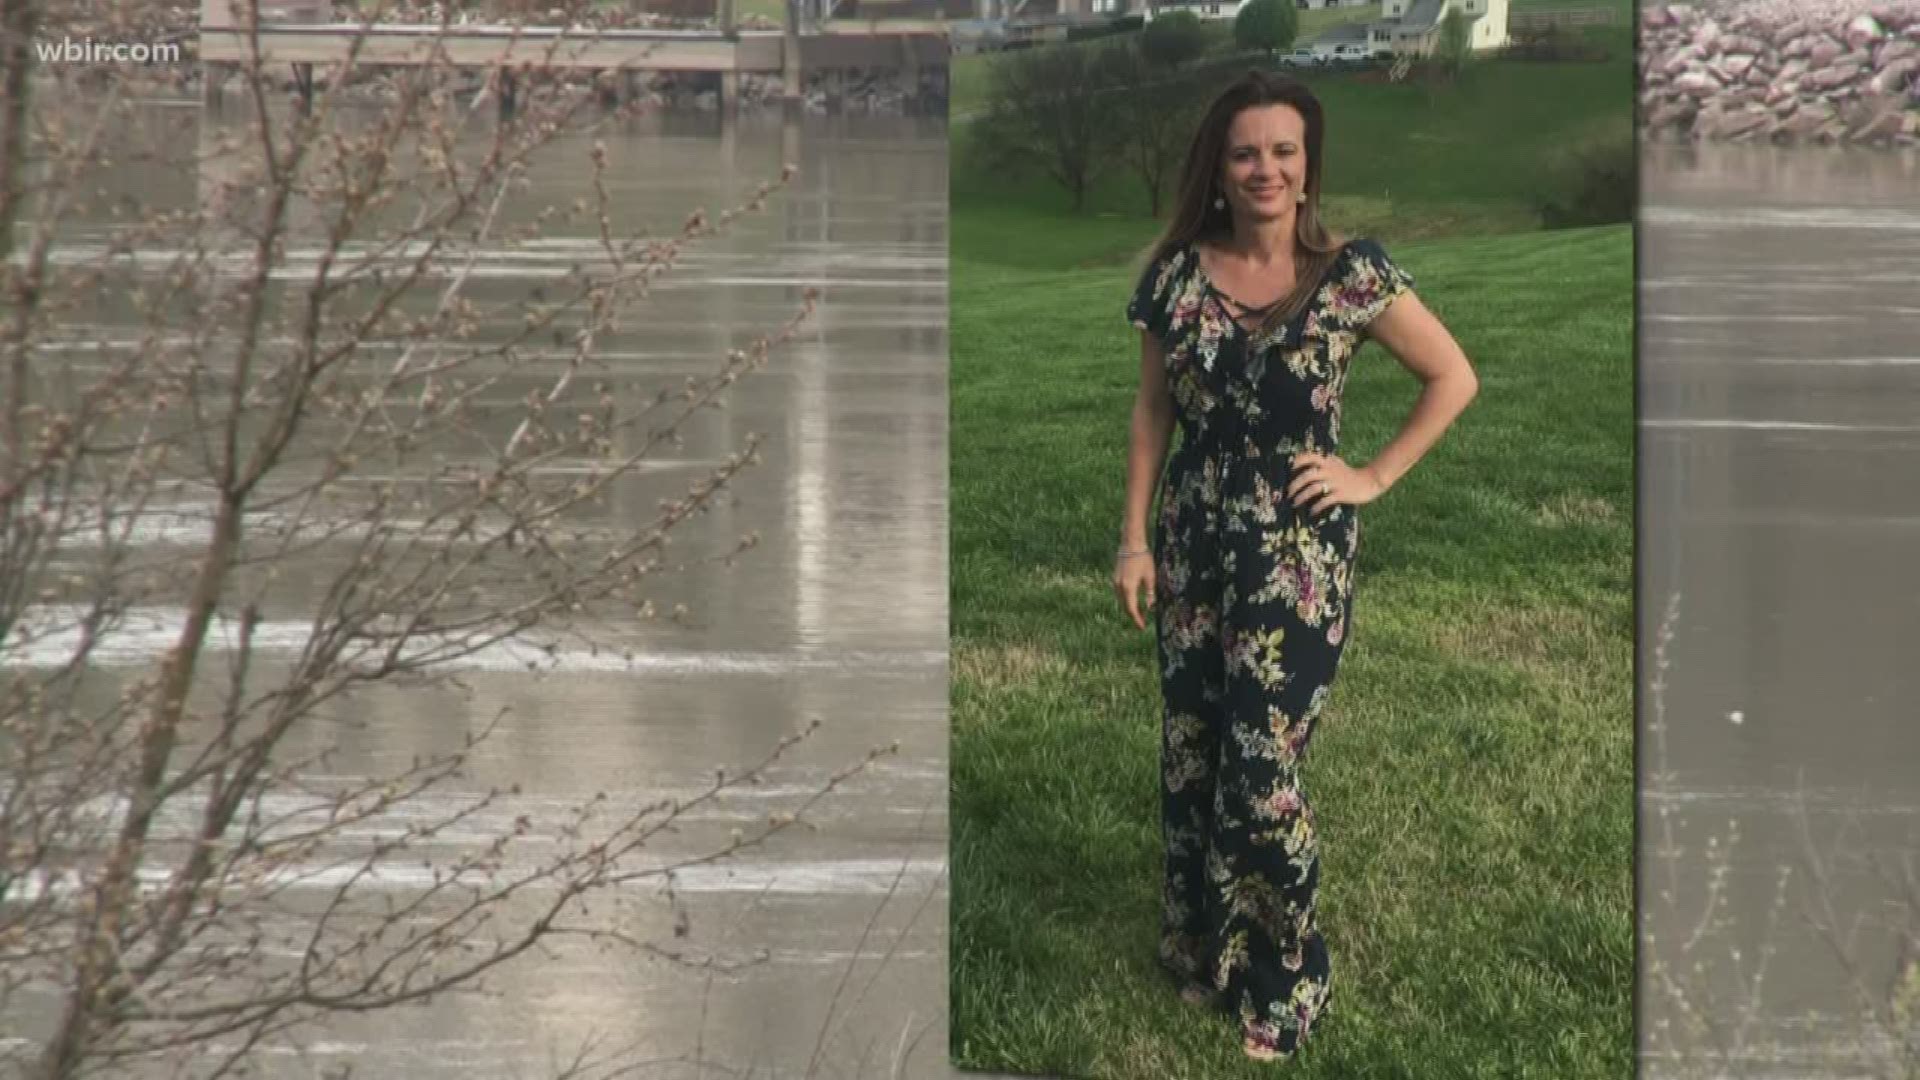 Tiffany Trull was last seen by her family on Friday. Her car was found on UT property near the Tennessee River, and authorities think she went in the water